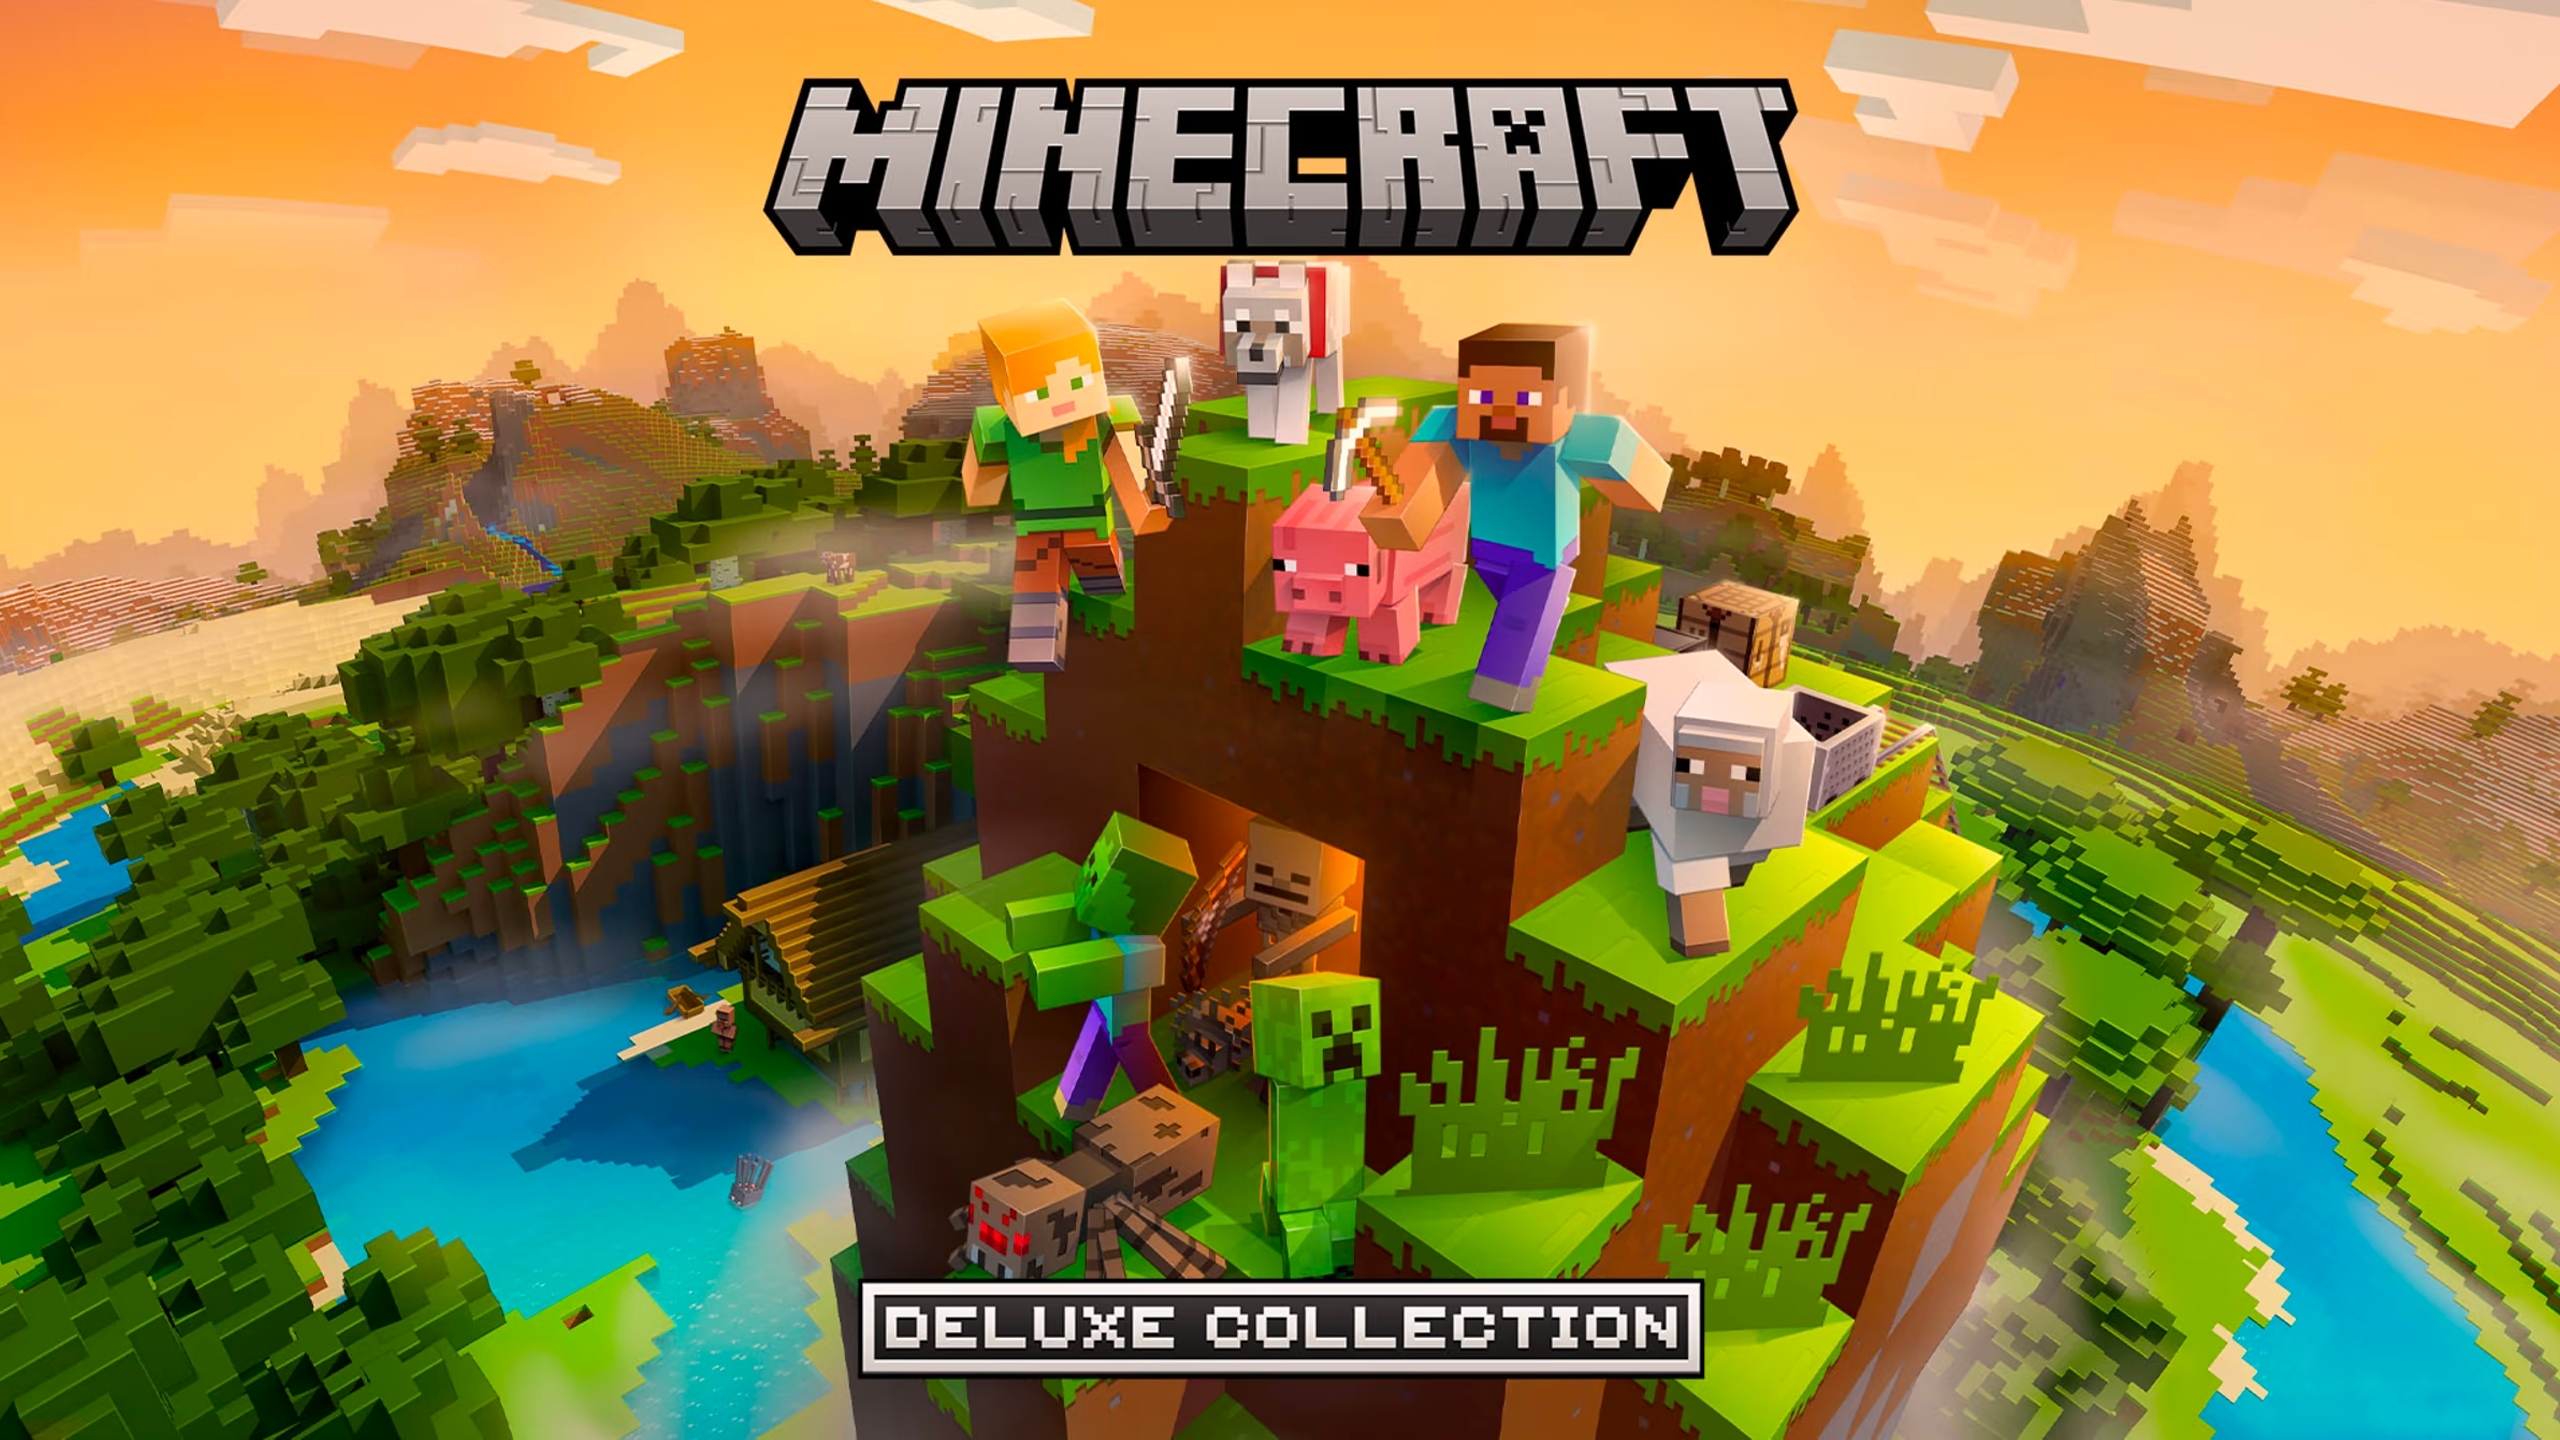 Minecraft Java Edition not showing up as purchased on the